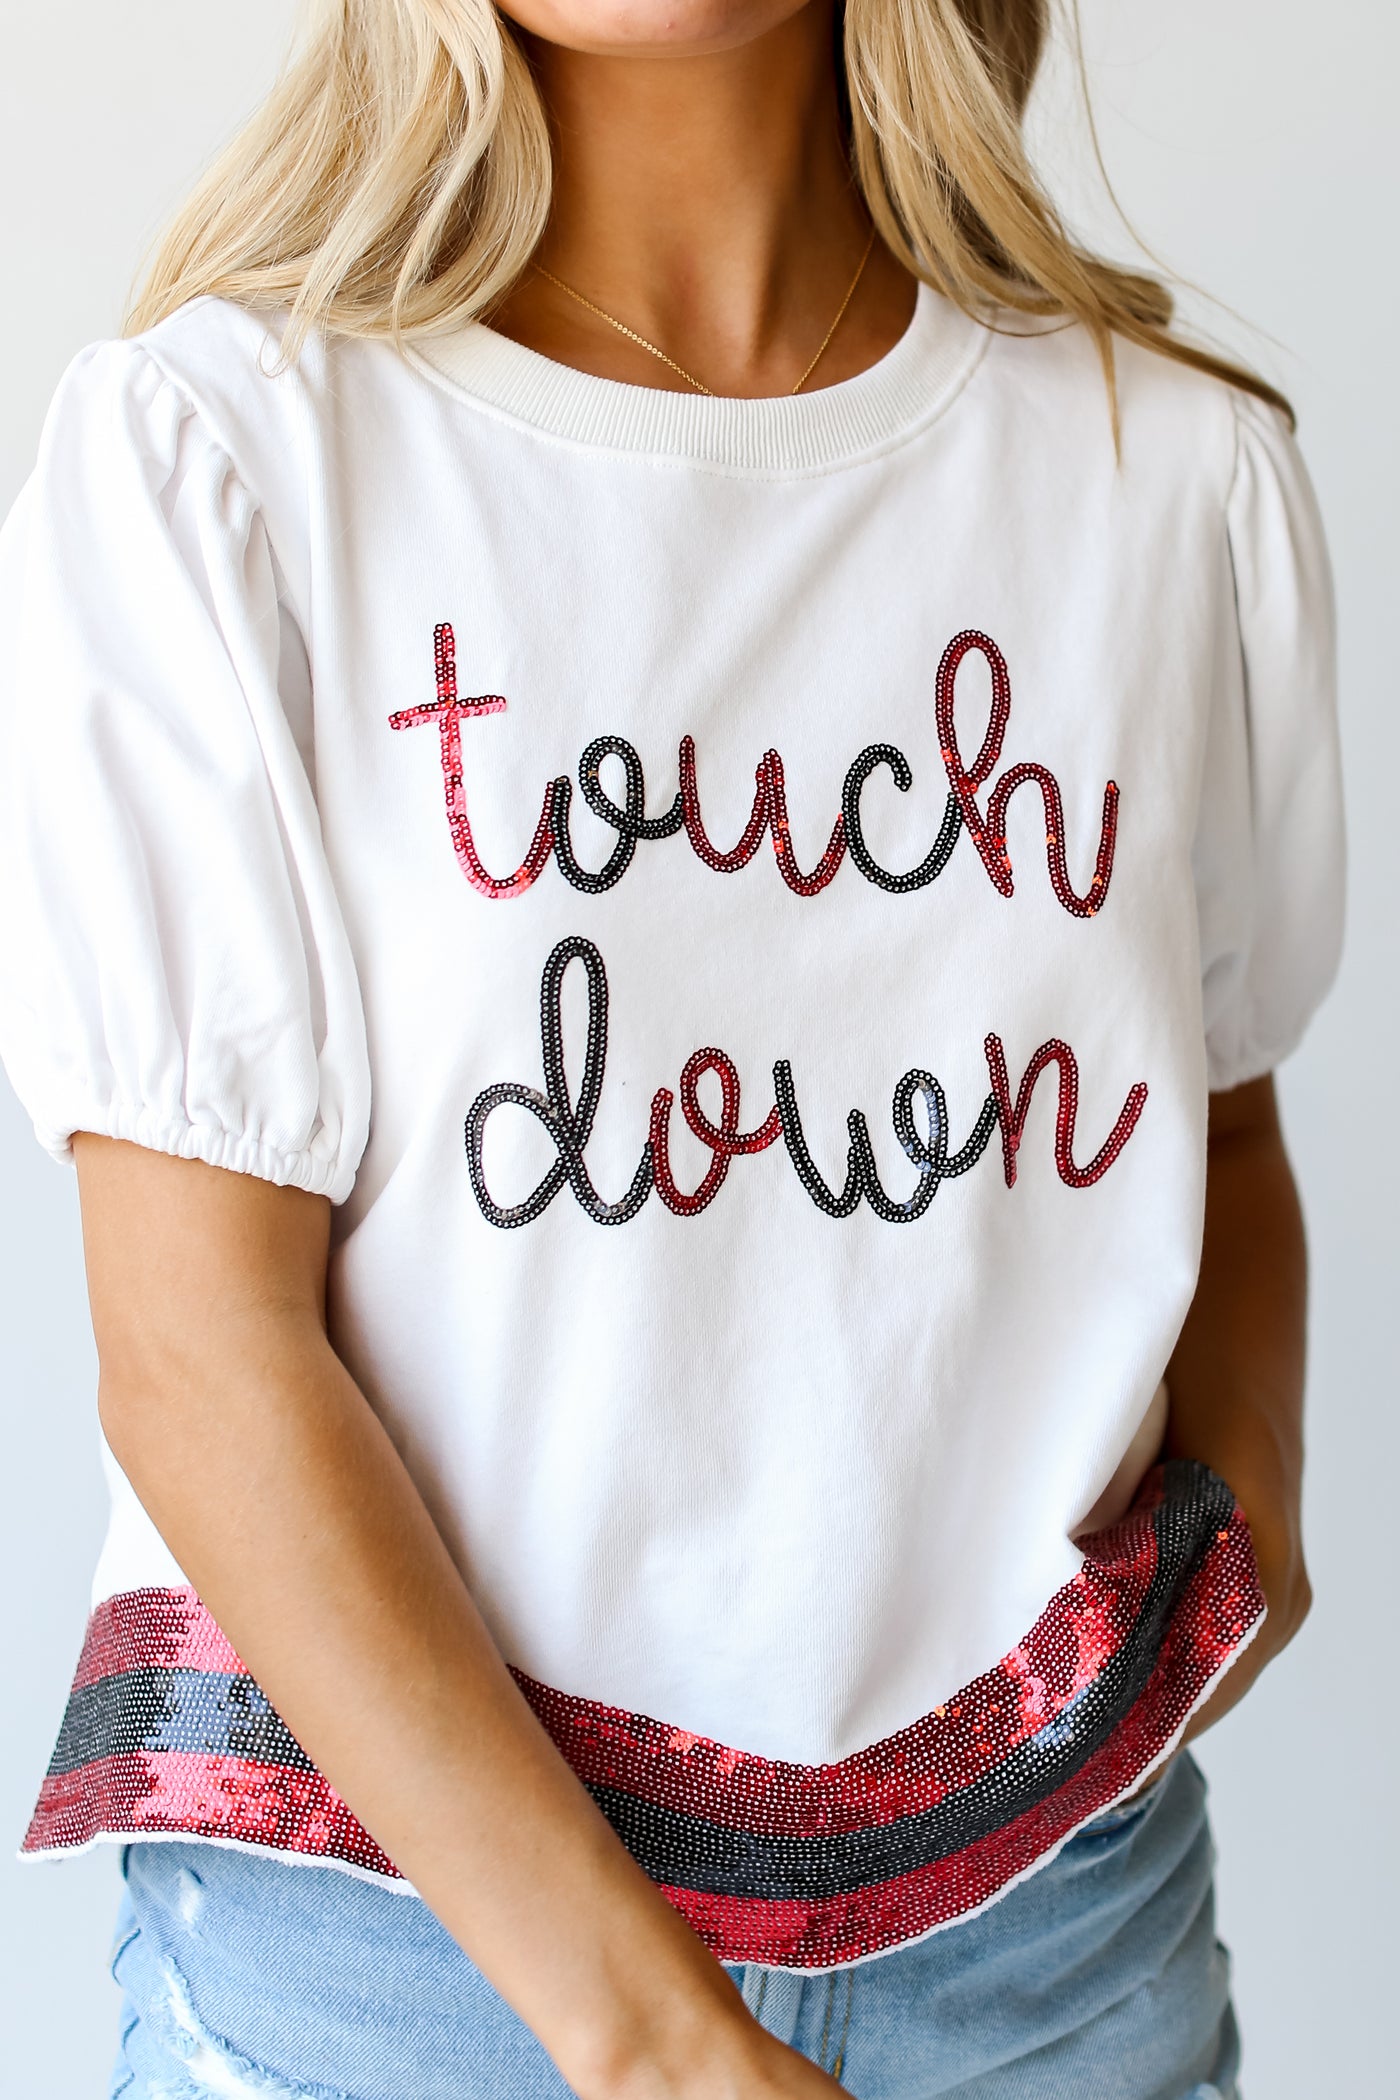 Touchdown Sequin Tee on model